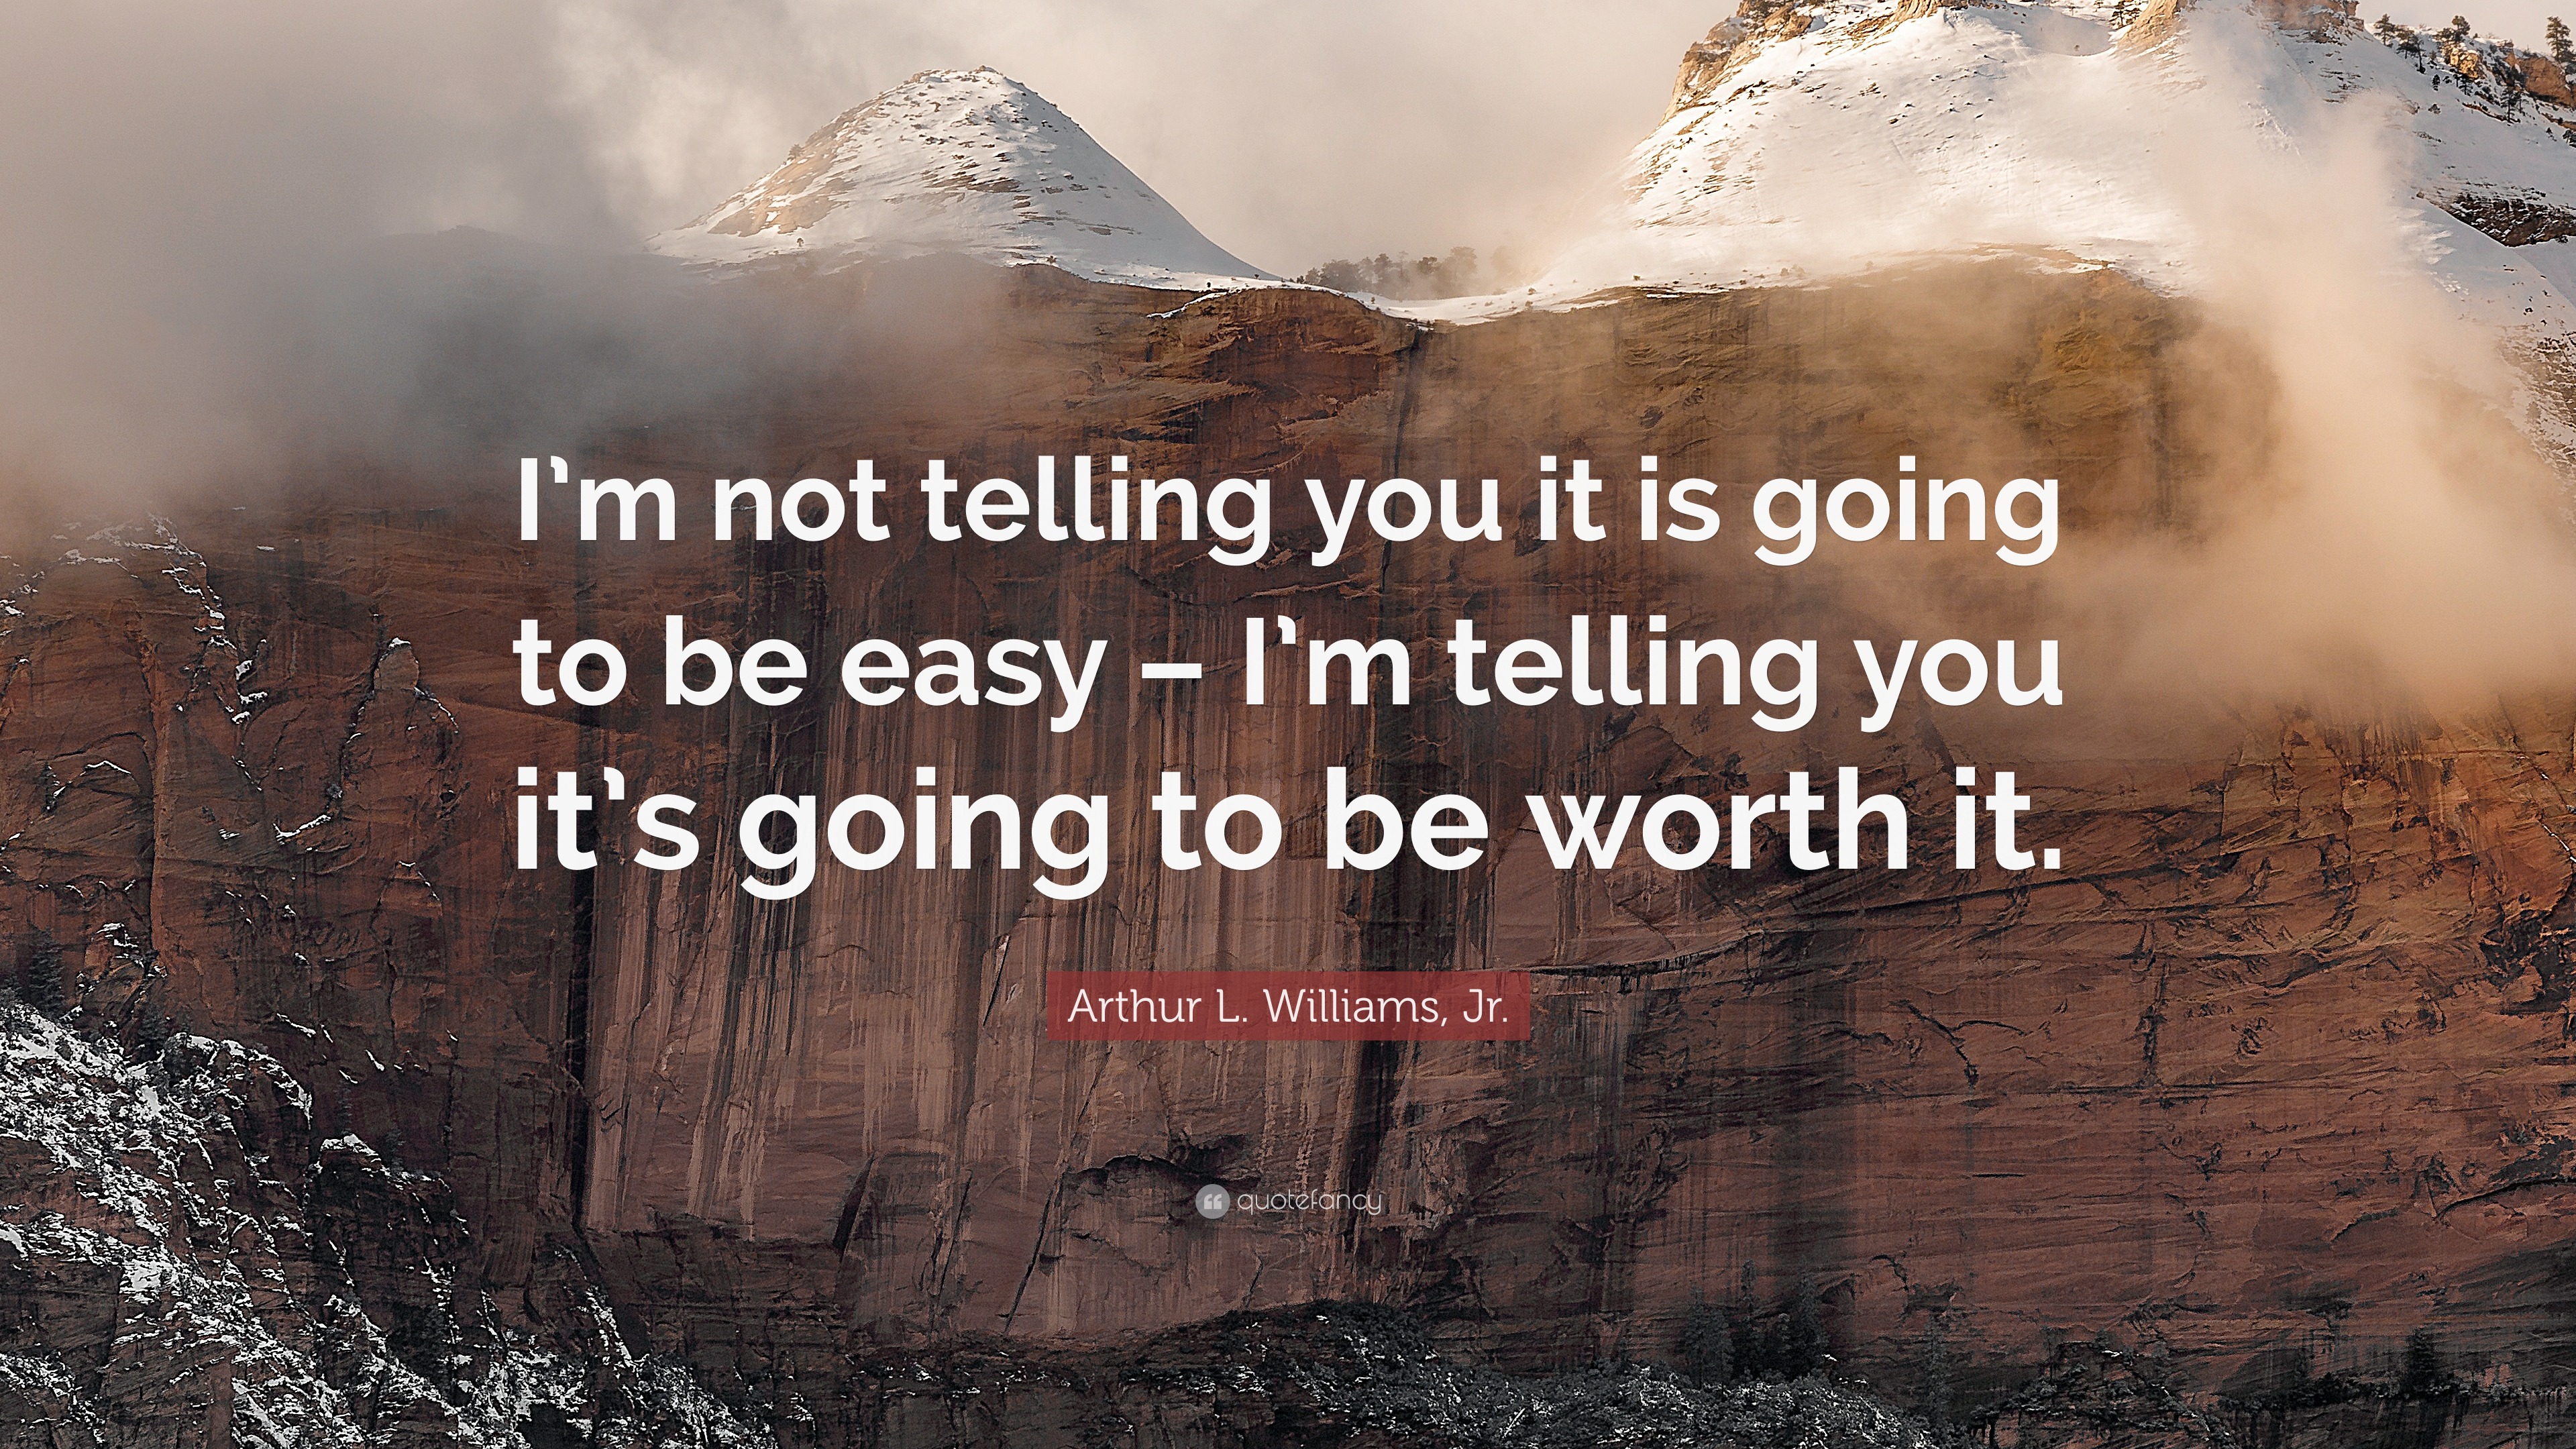 Arthur L. Williams, Jr. Quote: “I’m not telling you it is going to be ...